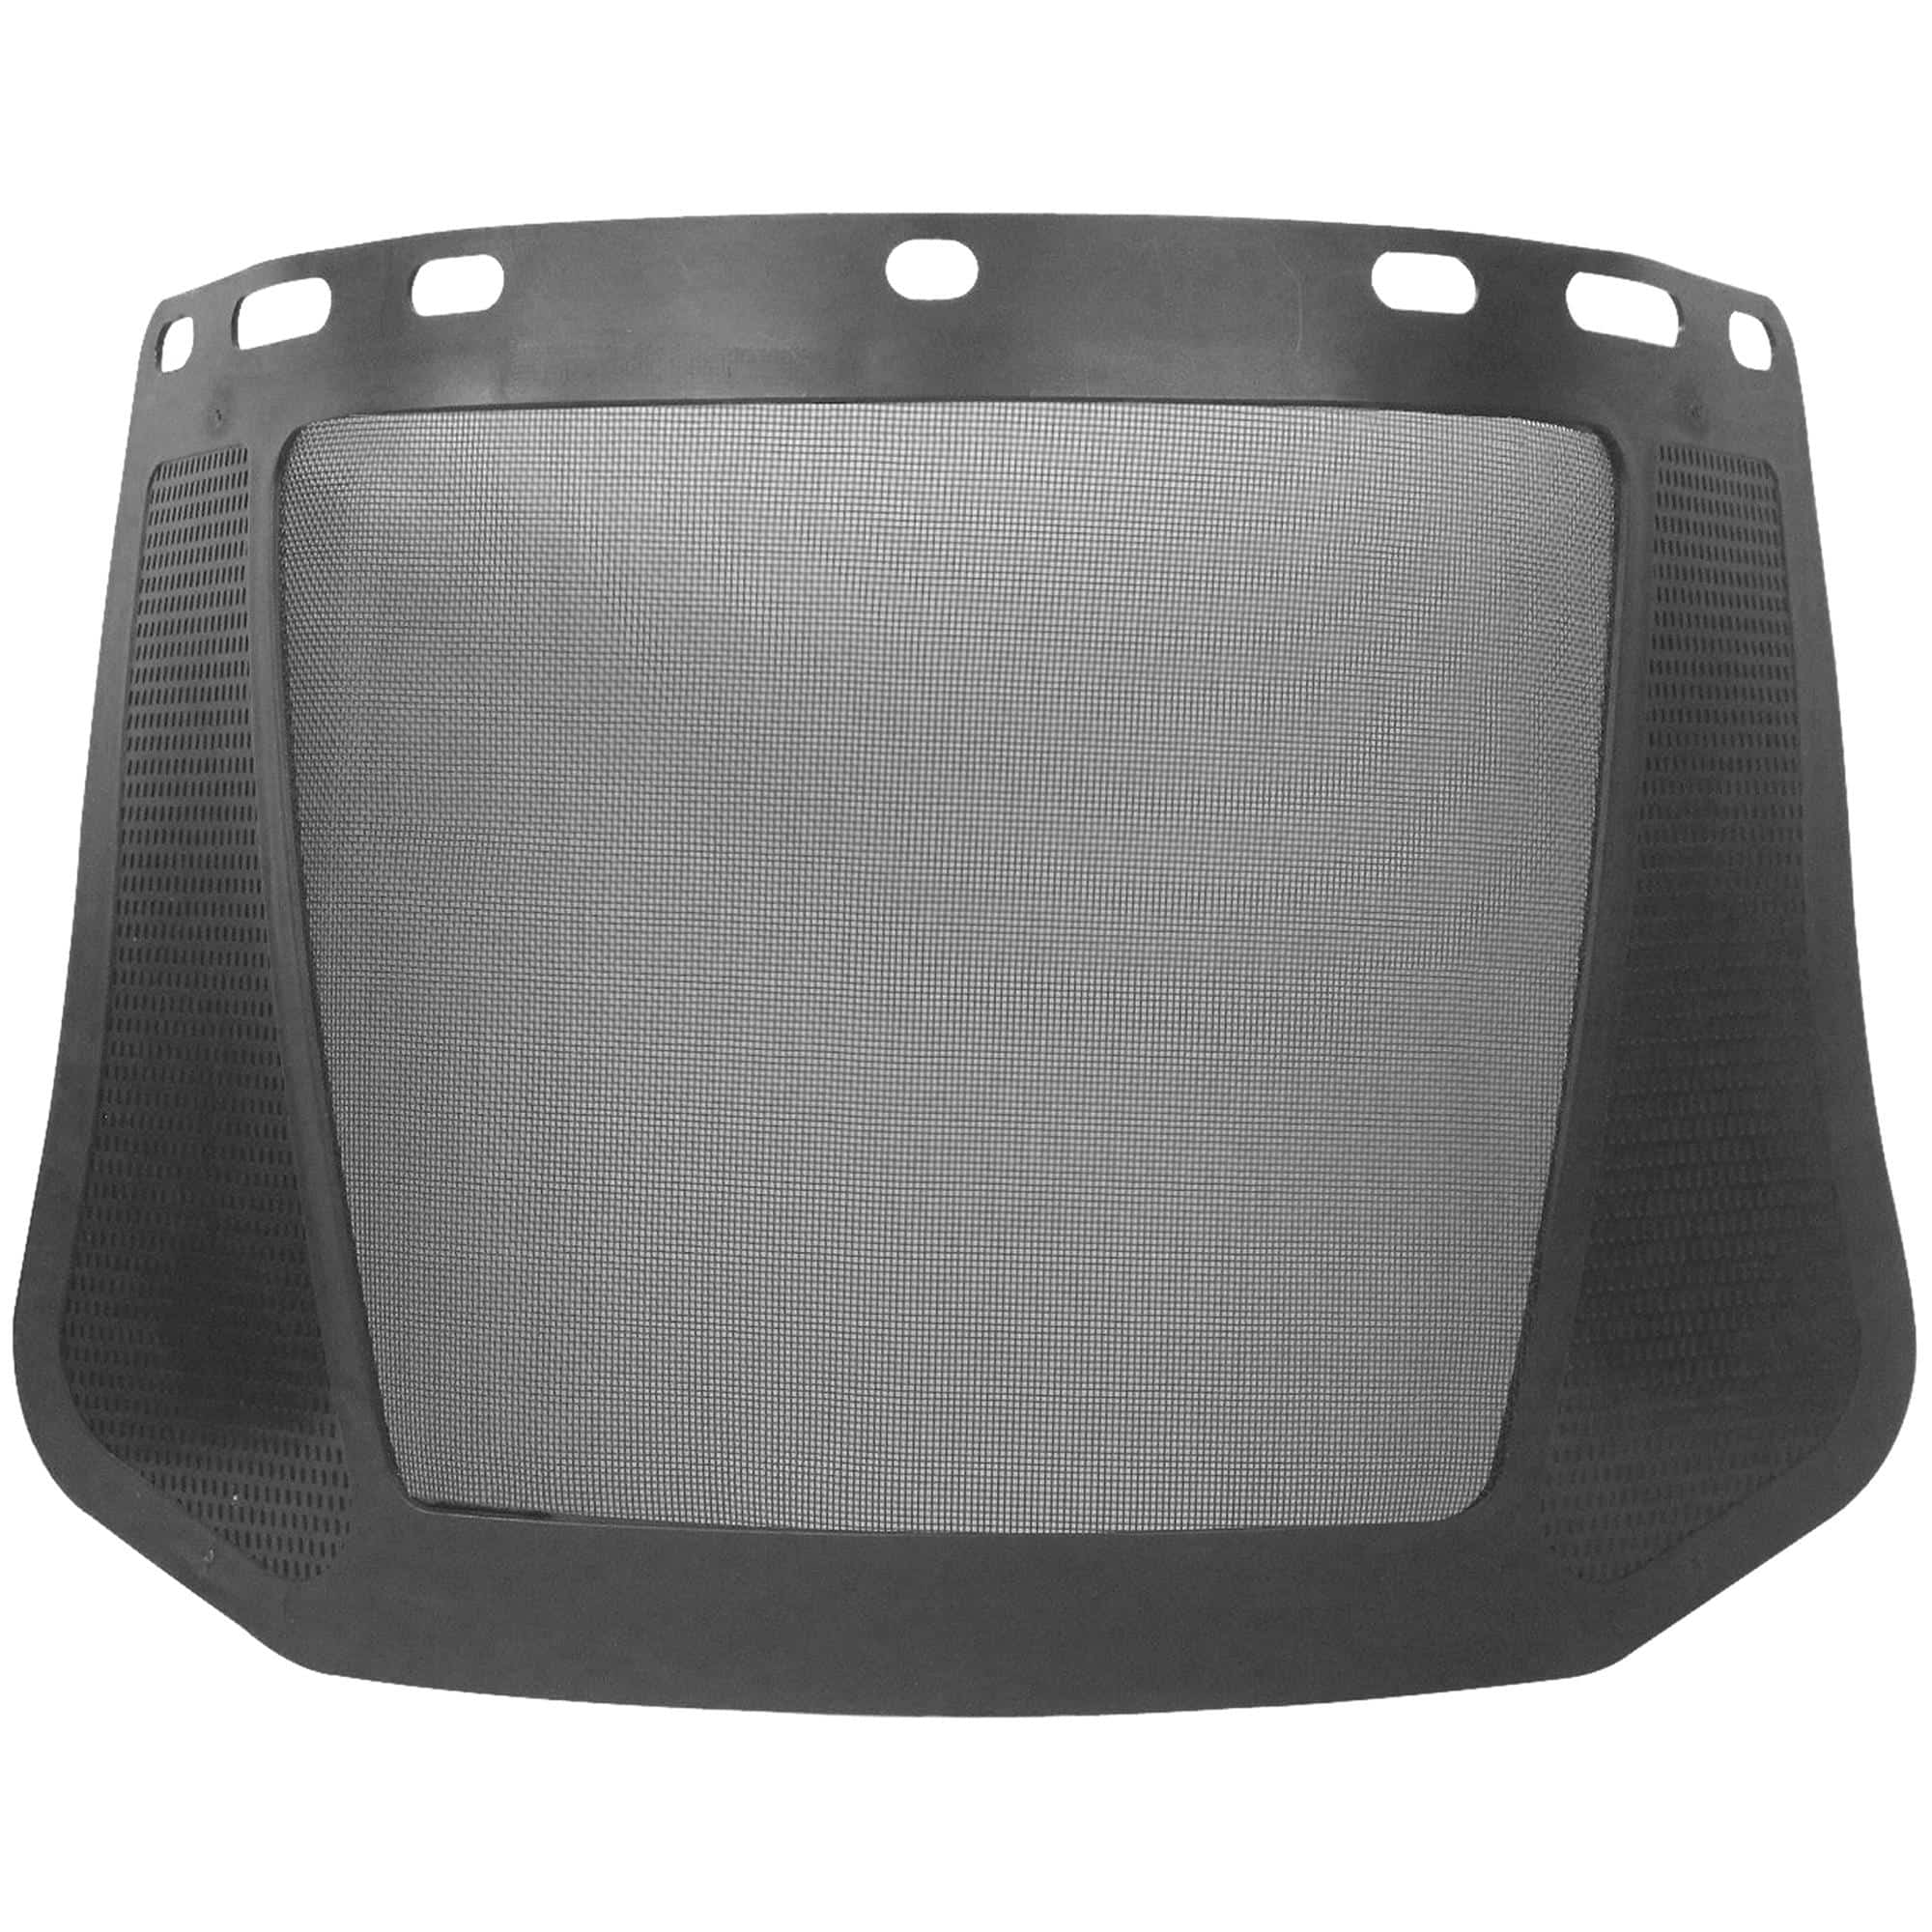 ERB 15196 Safety 8191 Steel Mesh Screen Face Shields Black One Size 